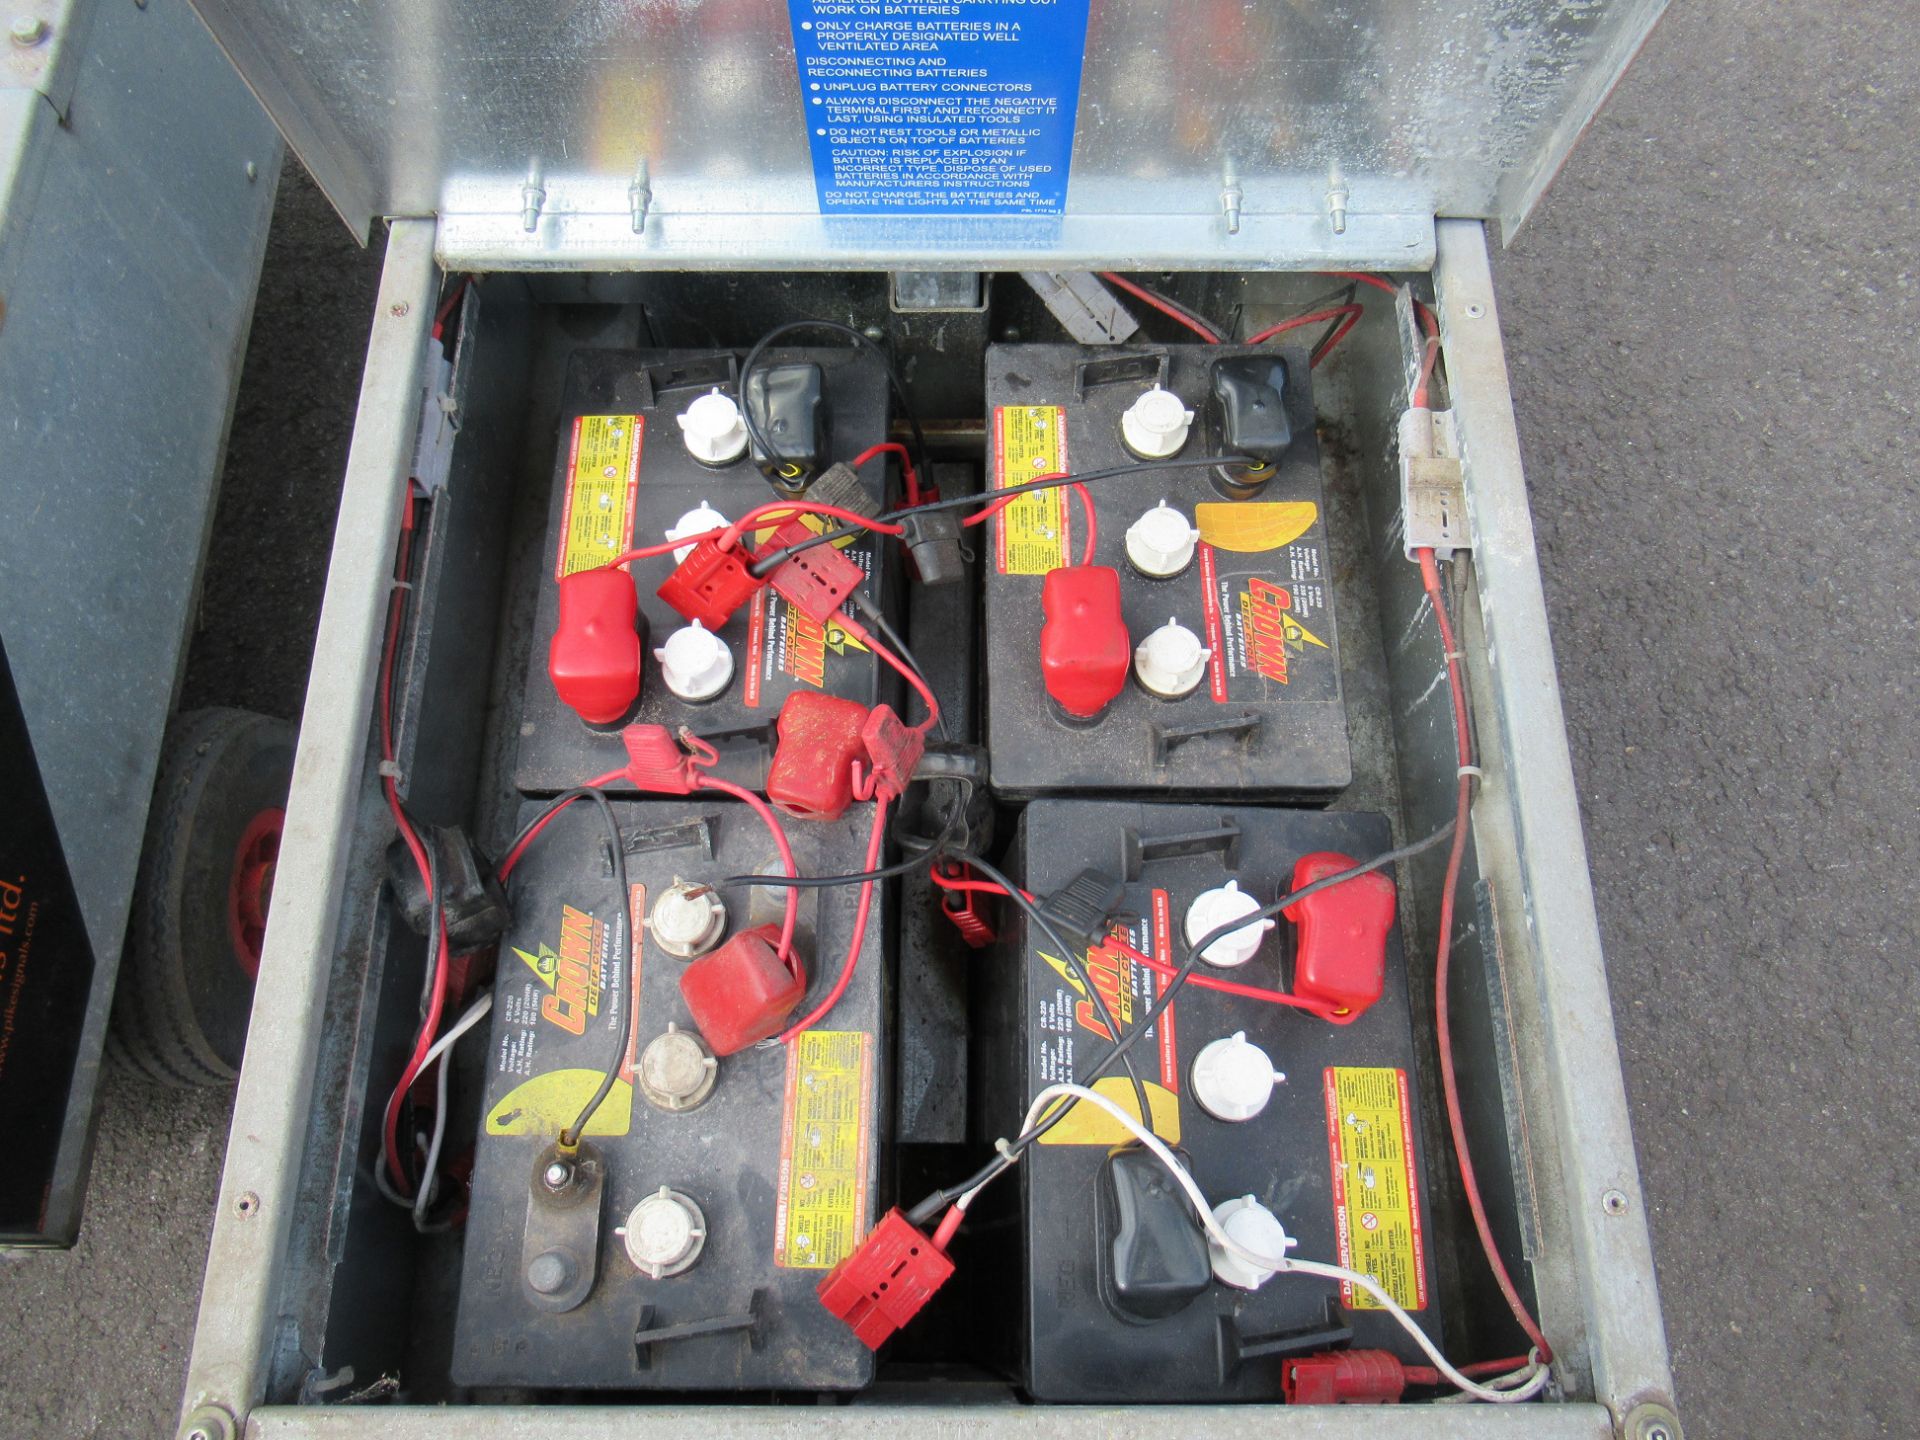 A Pair of Pike Signals Ltd "Vehicle" Battery Powered Portable Traffic Light Units - Image 6 of 7